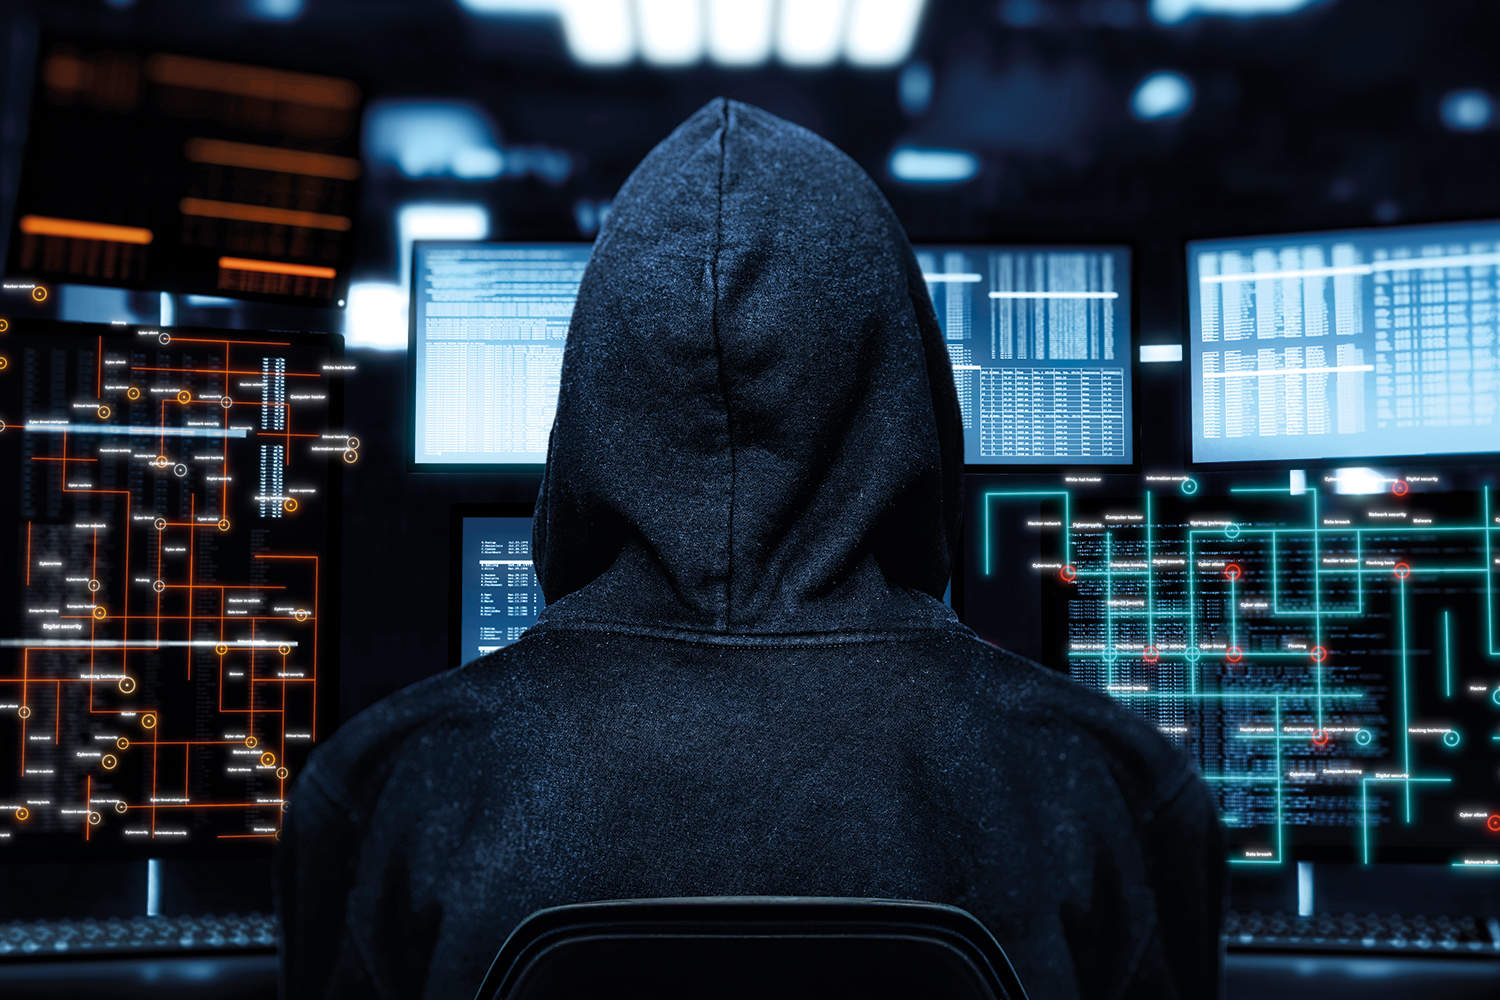 photo from behind of hooded person sat in front of several computer screens, overlaid with grid-like graphics of connecting computer systems